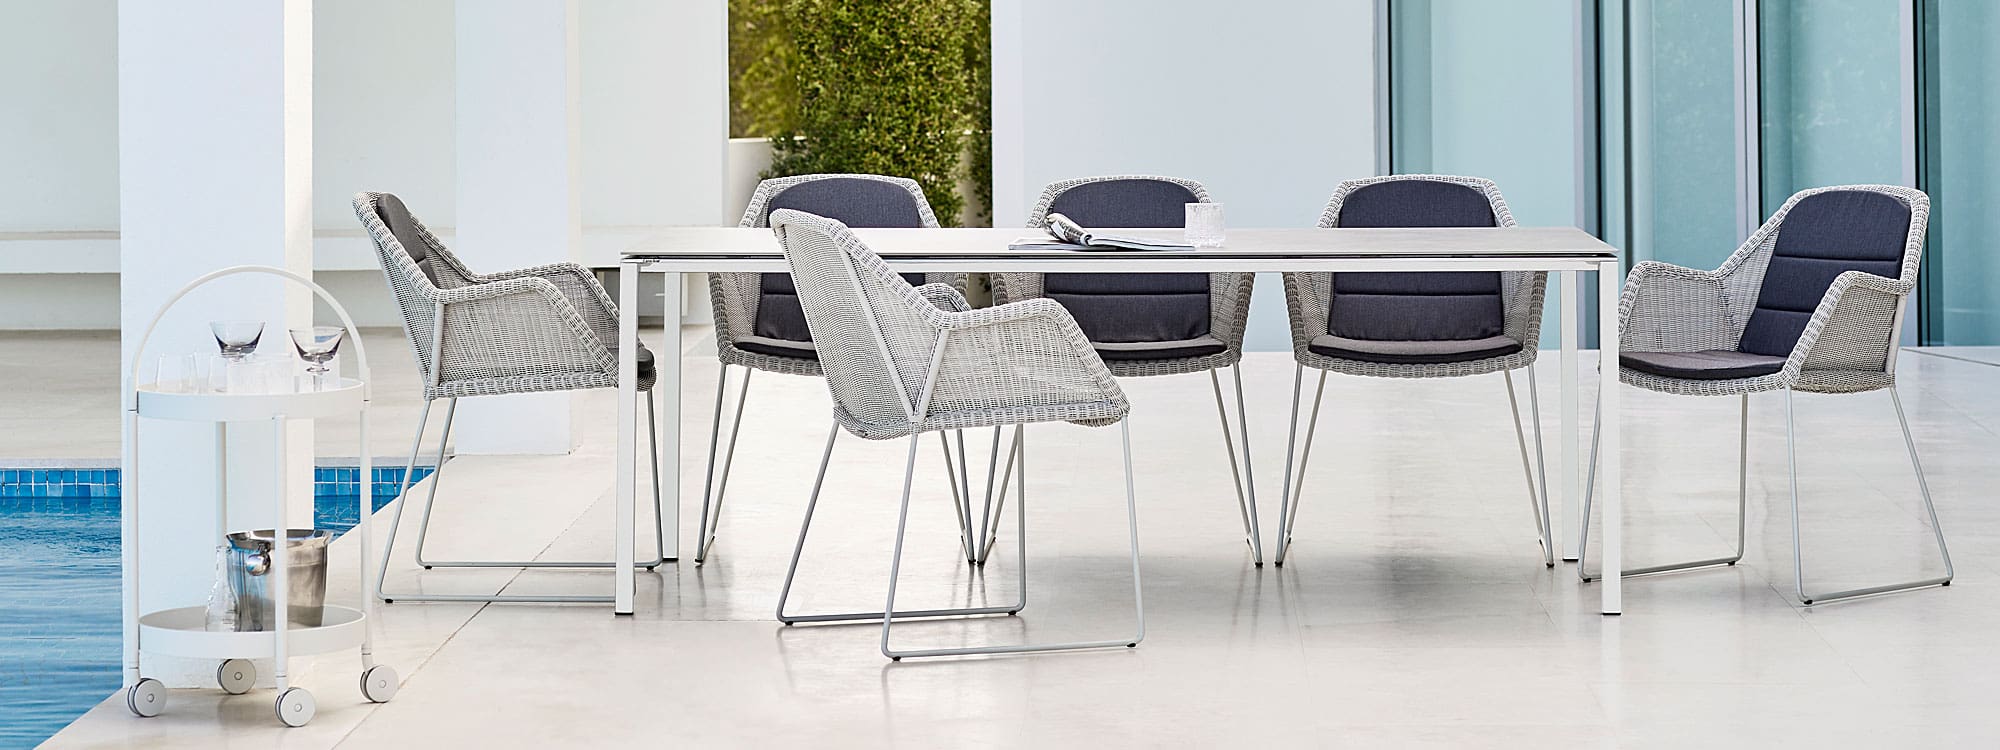 Image of white-grey Breeze woven dining chairs with sled leg and Pure garden dining table by Cane-line